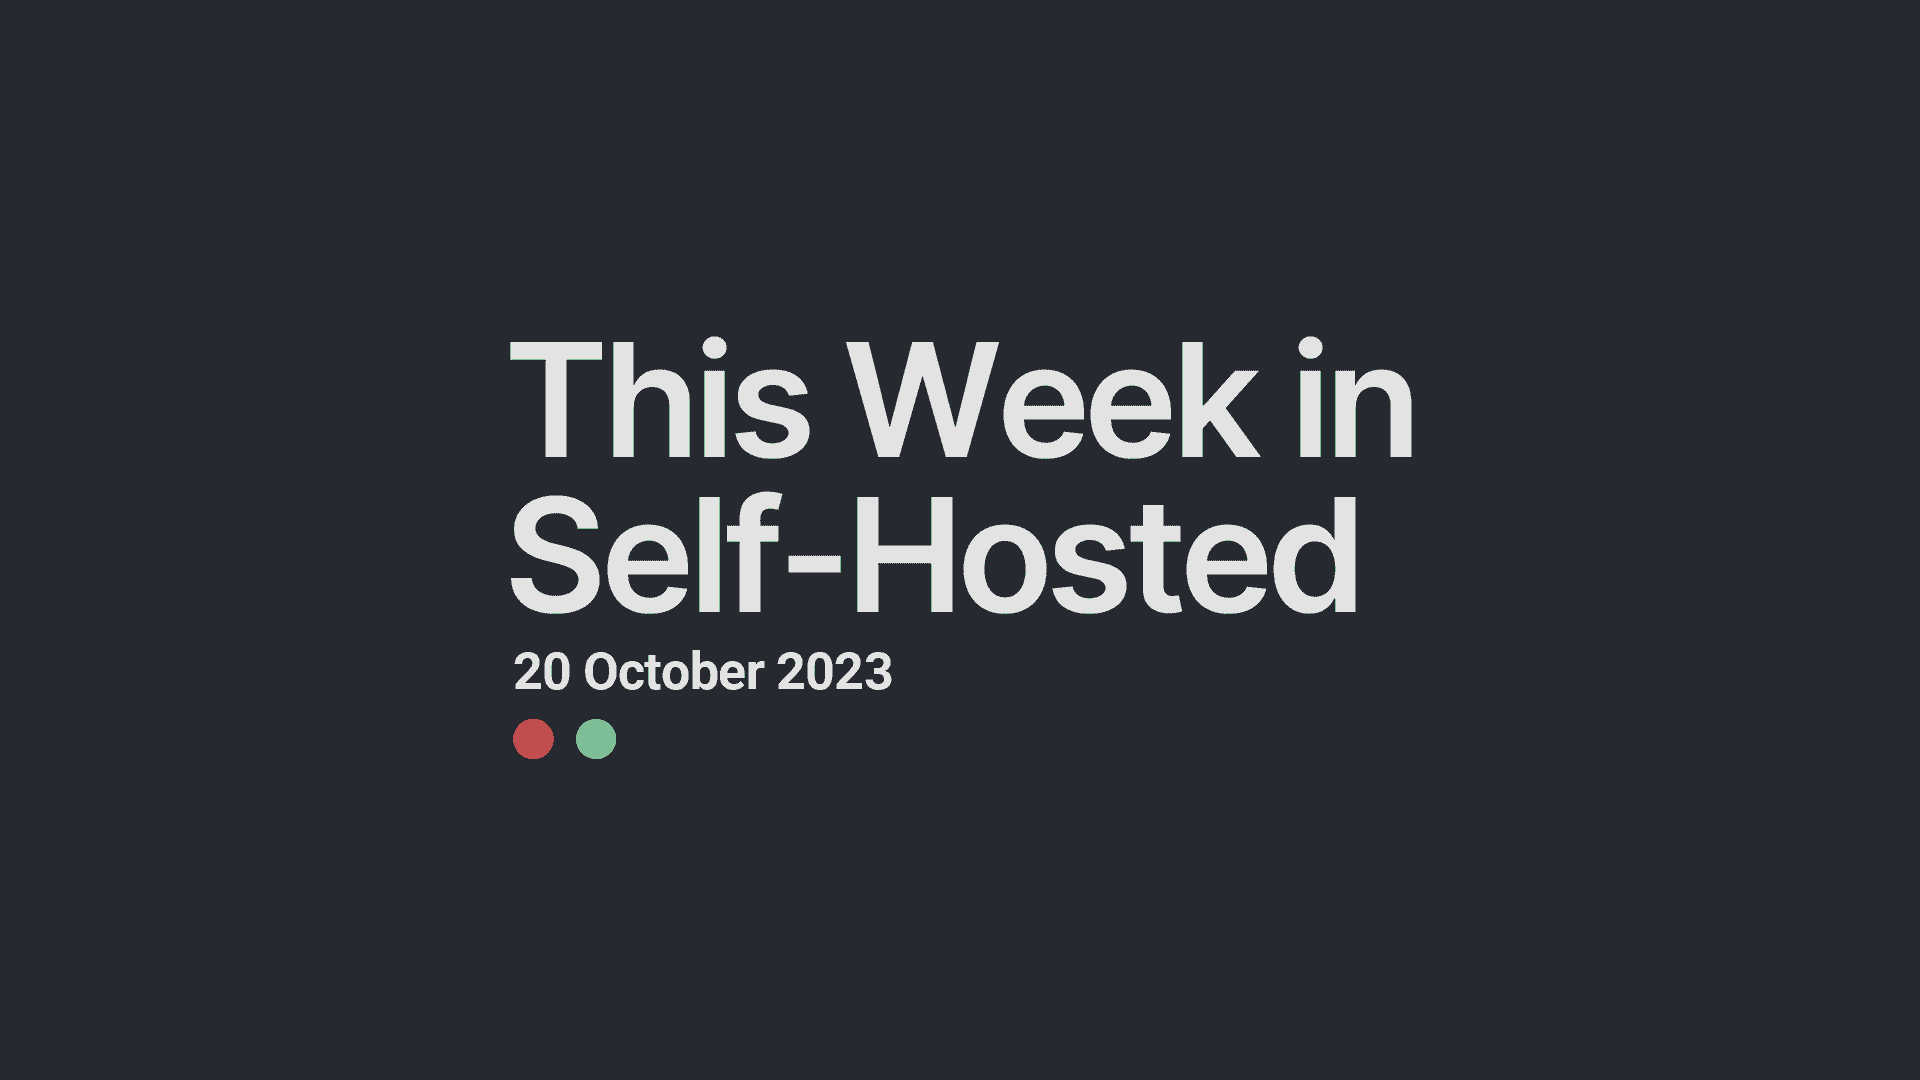 This Week in Self-Hosted (20 October 2023) Post image